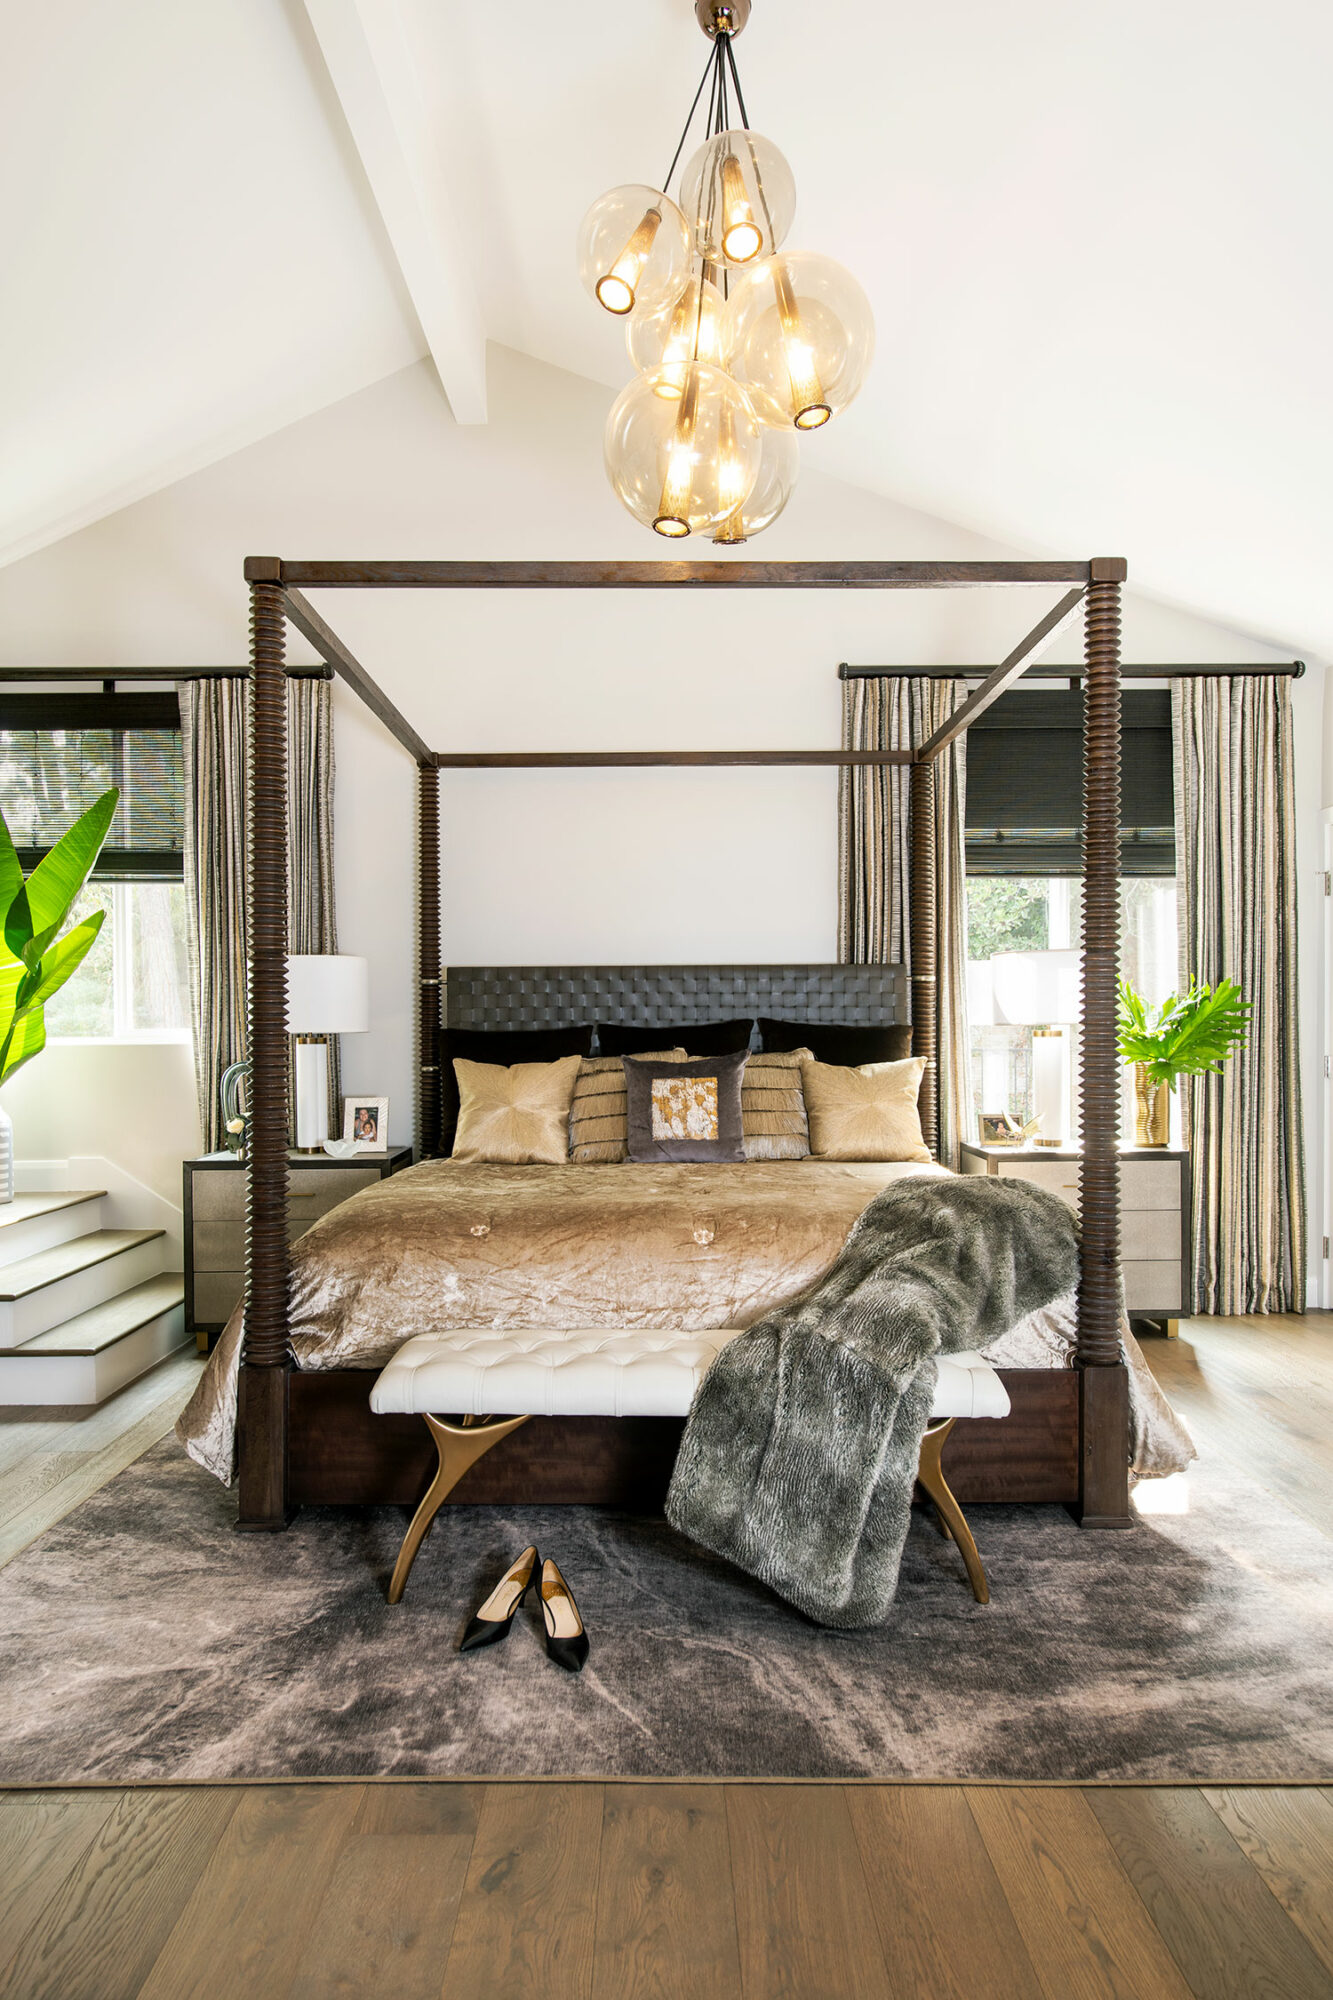 A light gray bedroom with a brown four-poster bed and a modern chandelier.